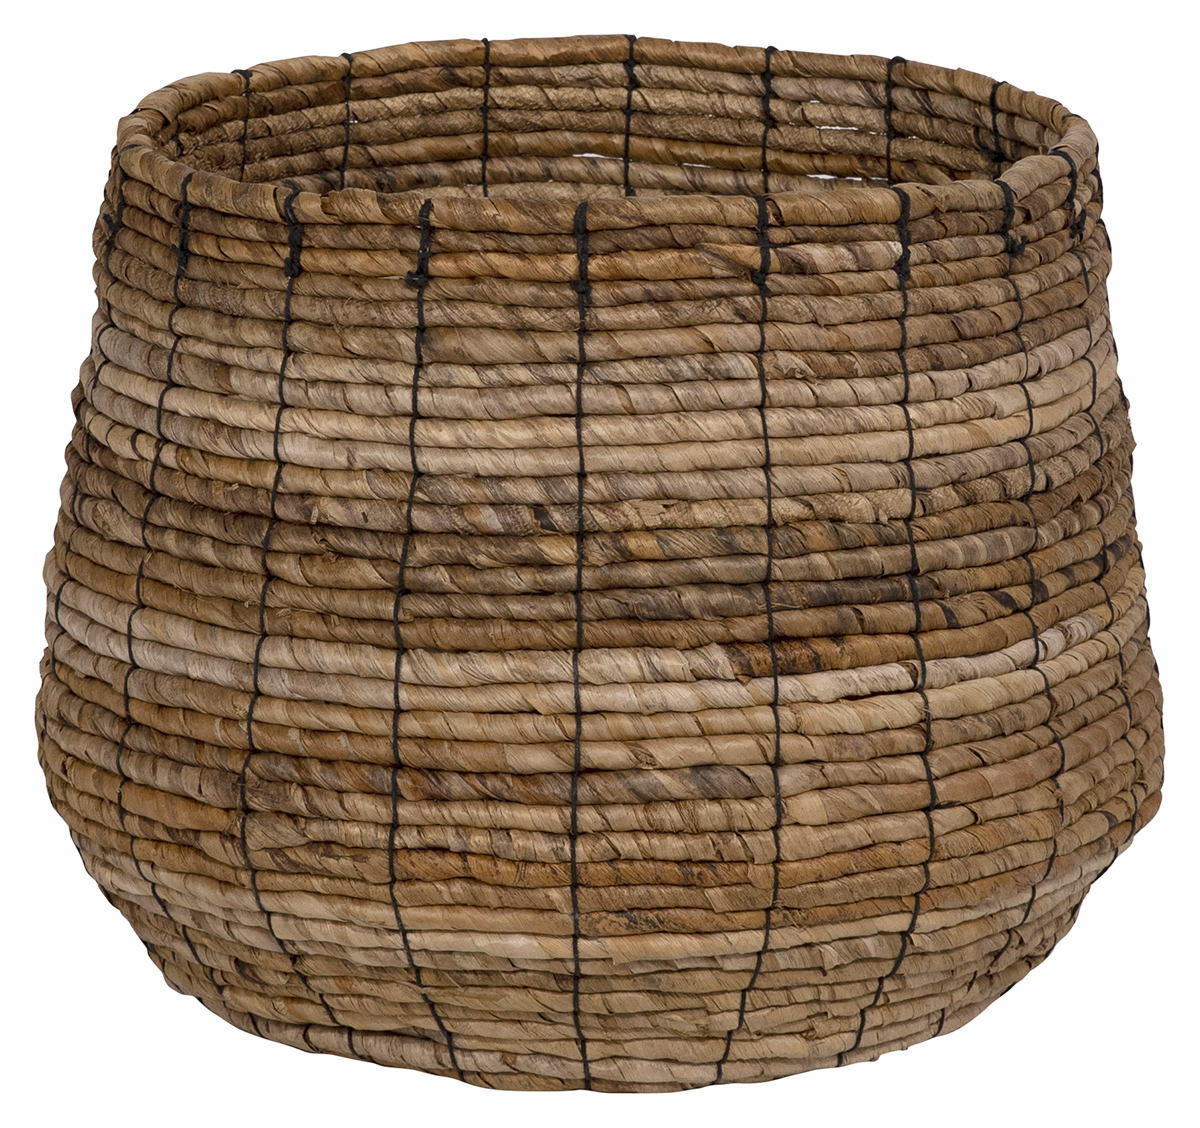 The Nina Basket is made from banana fiber and cotton rope, adding a rustic element to your vintage home decor. Available at Mt. Pleasant furniture store GDC.